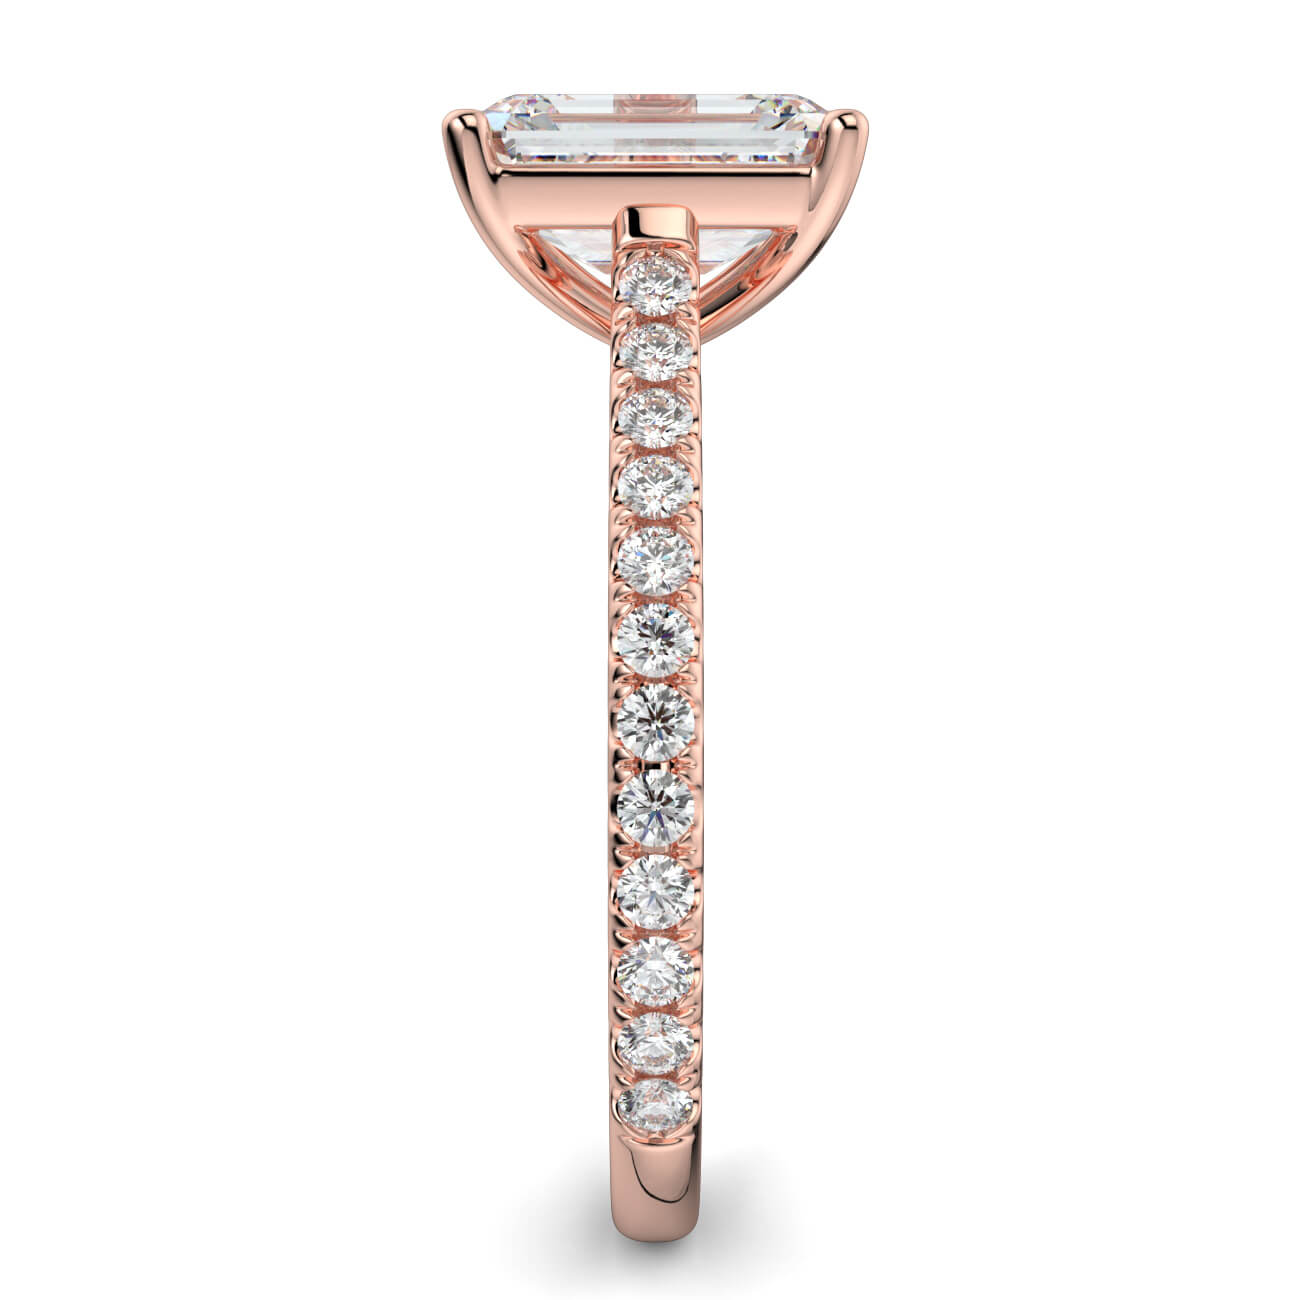 Emerald Cut diamond cathedral engagement ring in rose gold – Australian Diamond Network